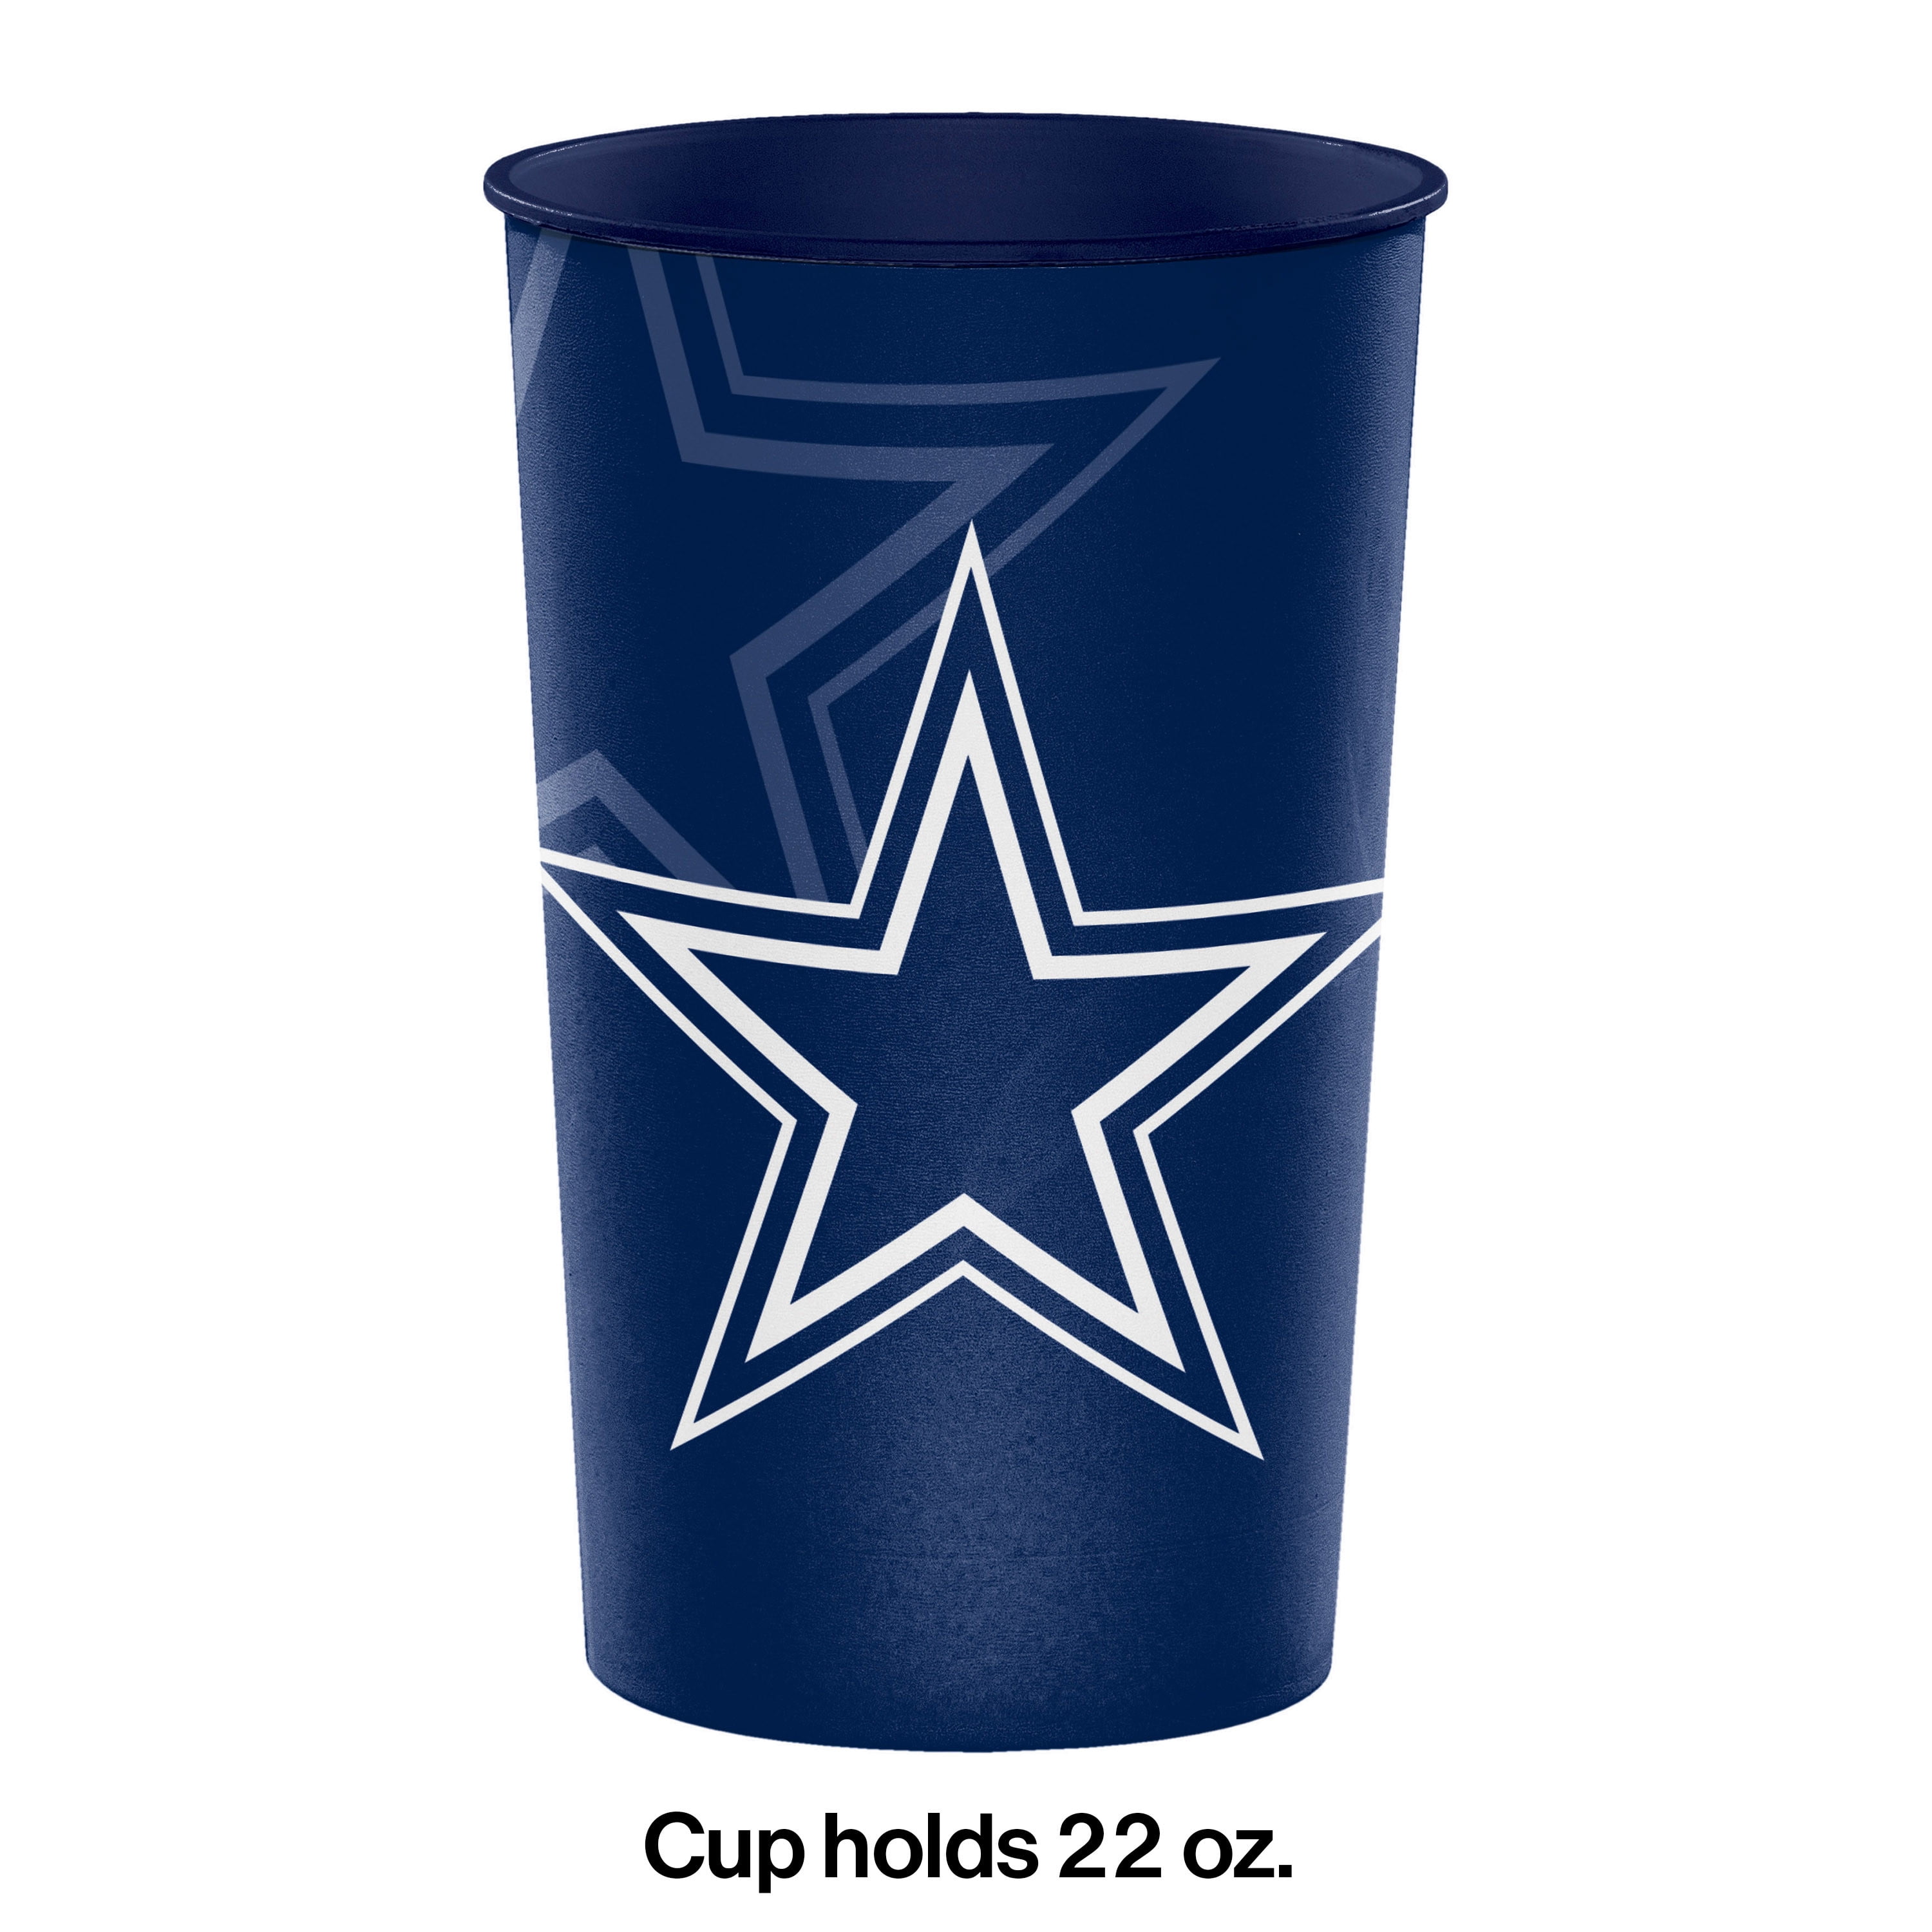 Dallas Cowboys Football Cup Powder Coated in Glowbee Clear, Polar White And  Ford Dark Blue